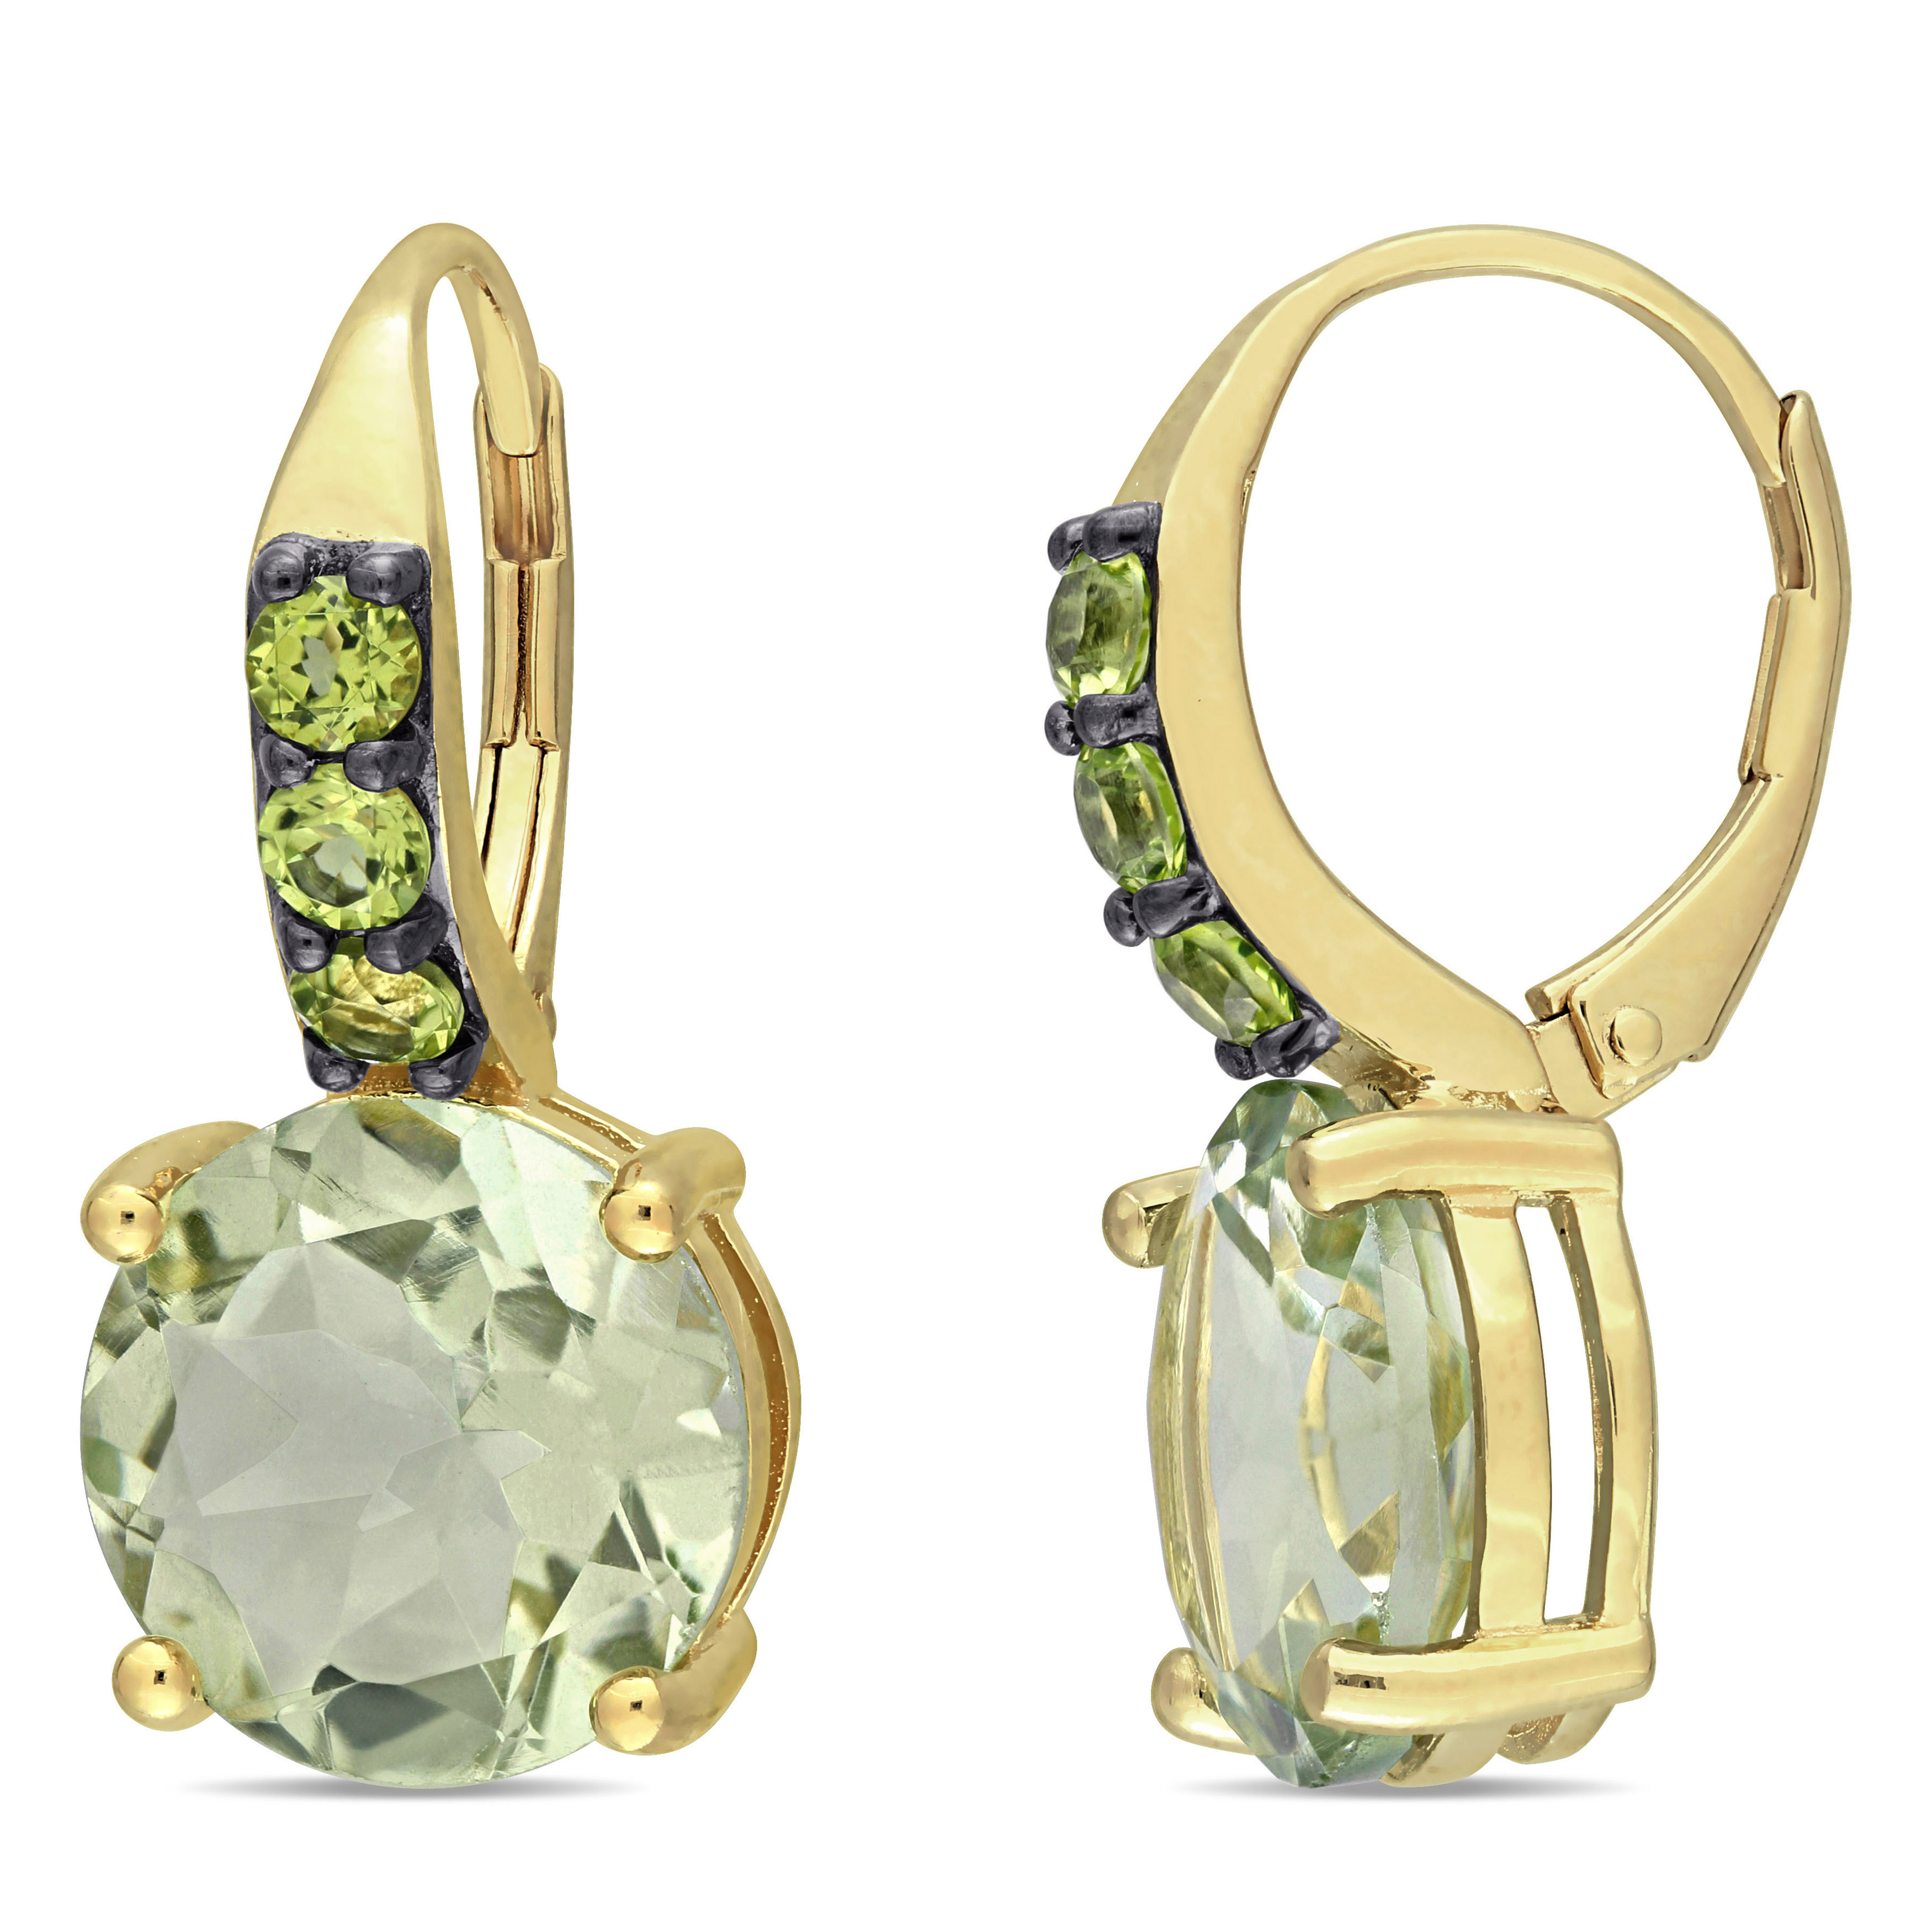 12 3/8 CT TGW Green Quartz Peridot Leverback Earrings in Yellow Plated Sterling Silver with Black Rhodium